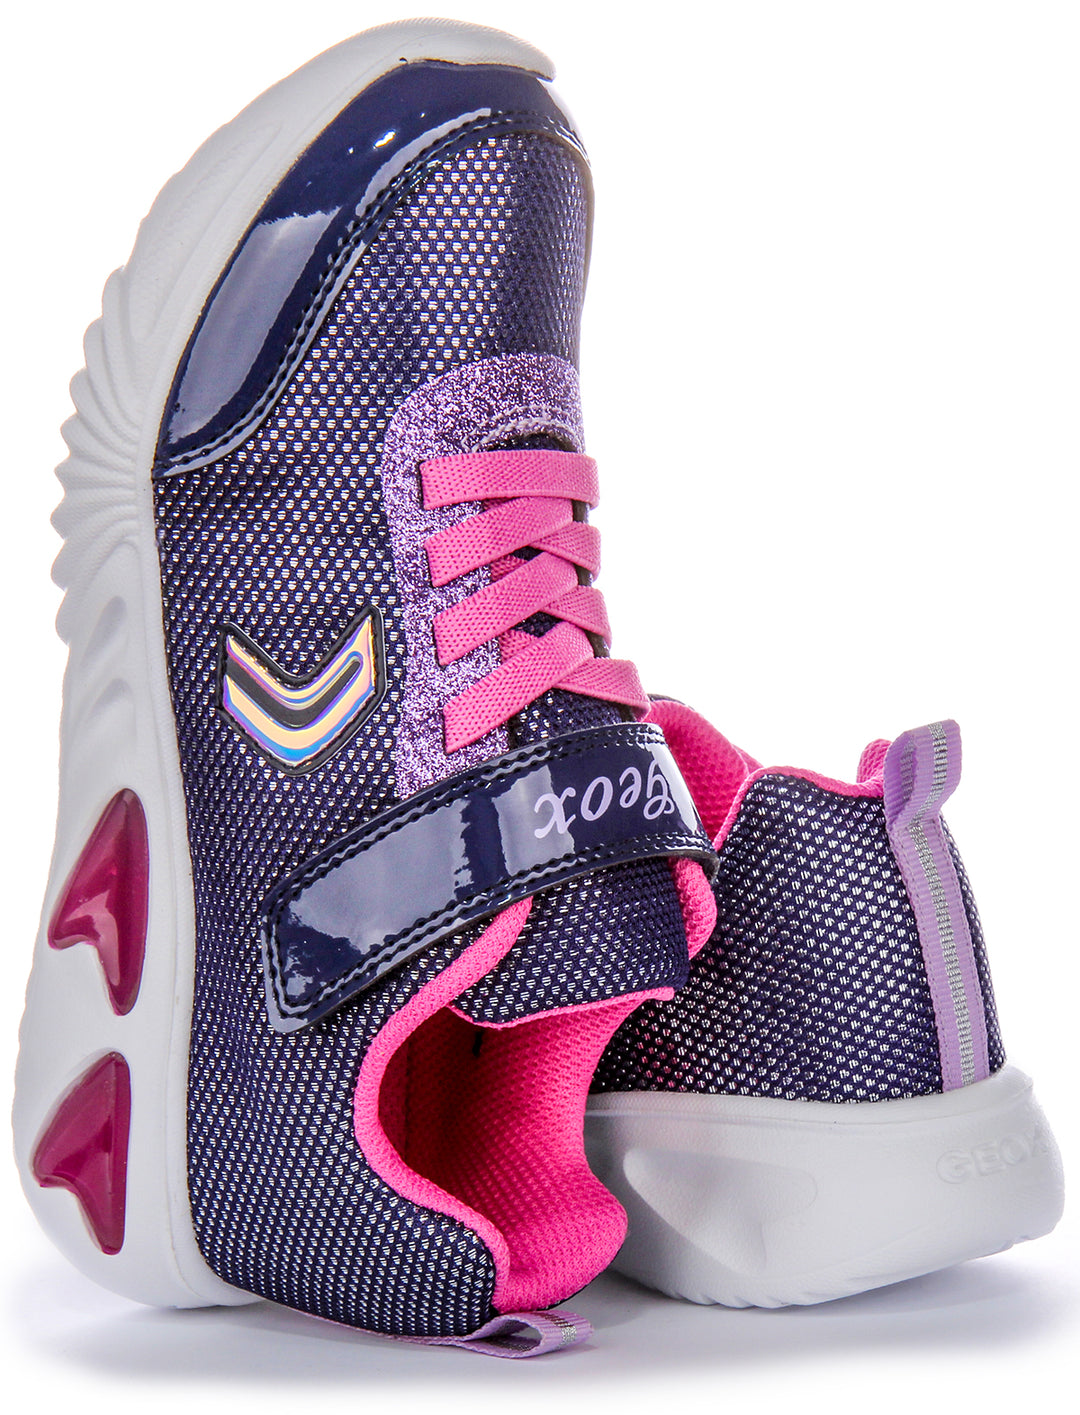 Geox J Assister G. A In Navy Pink For Infants